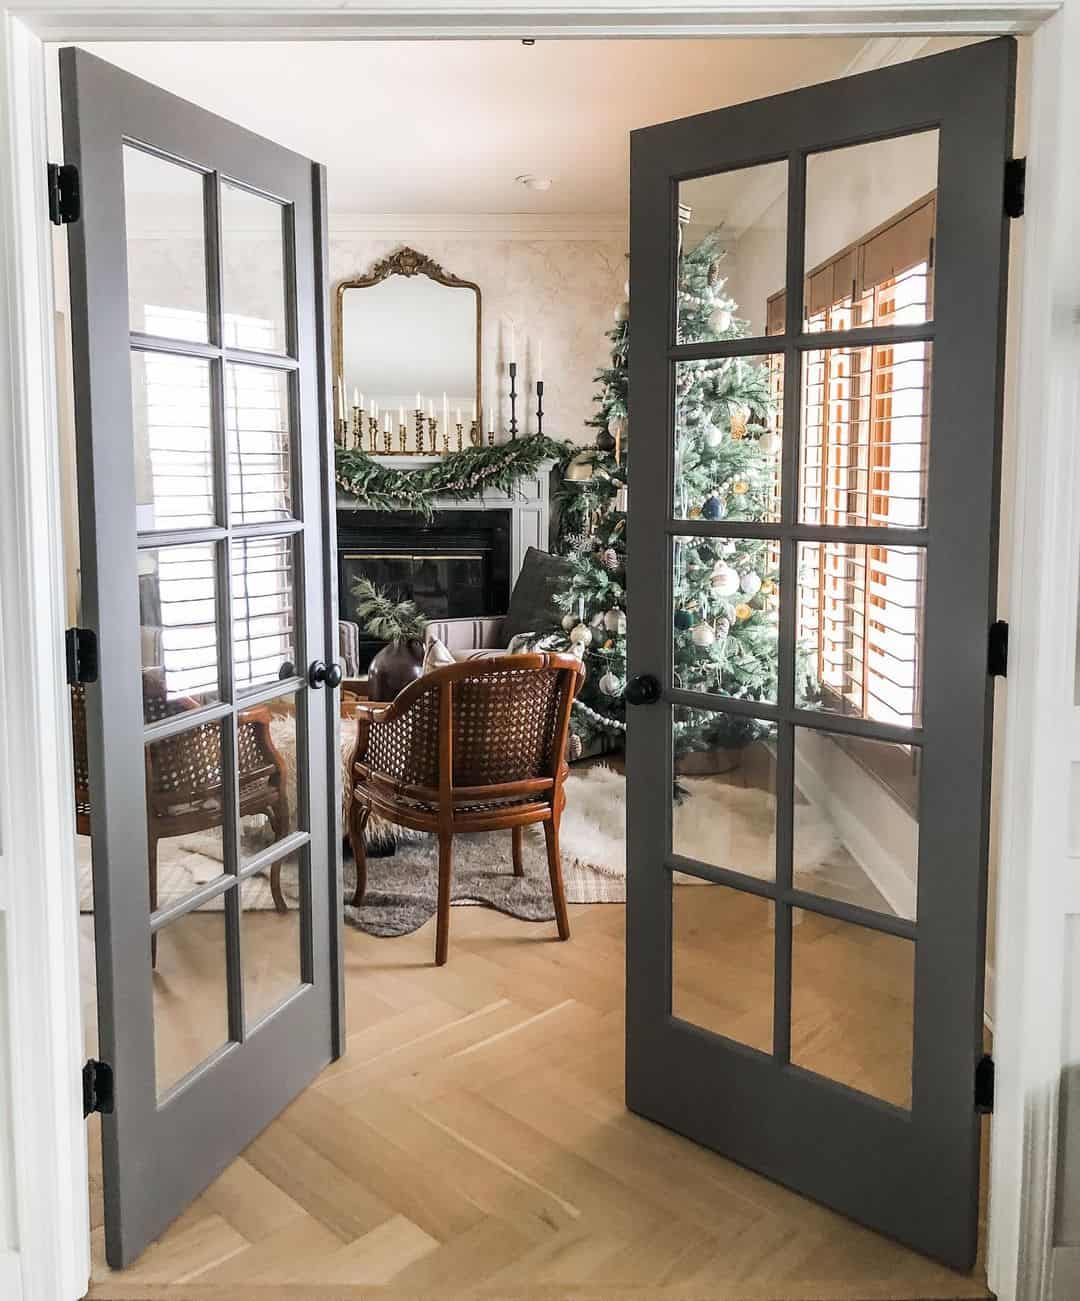 16 Design Ideas for Living Room with French Doors